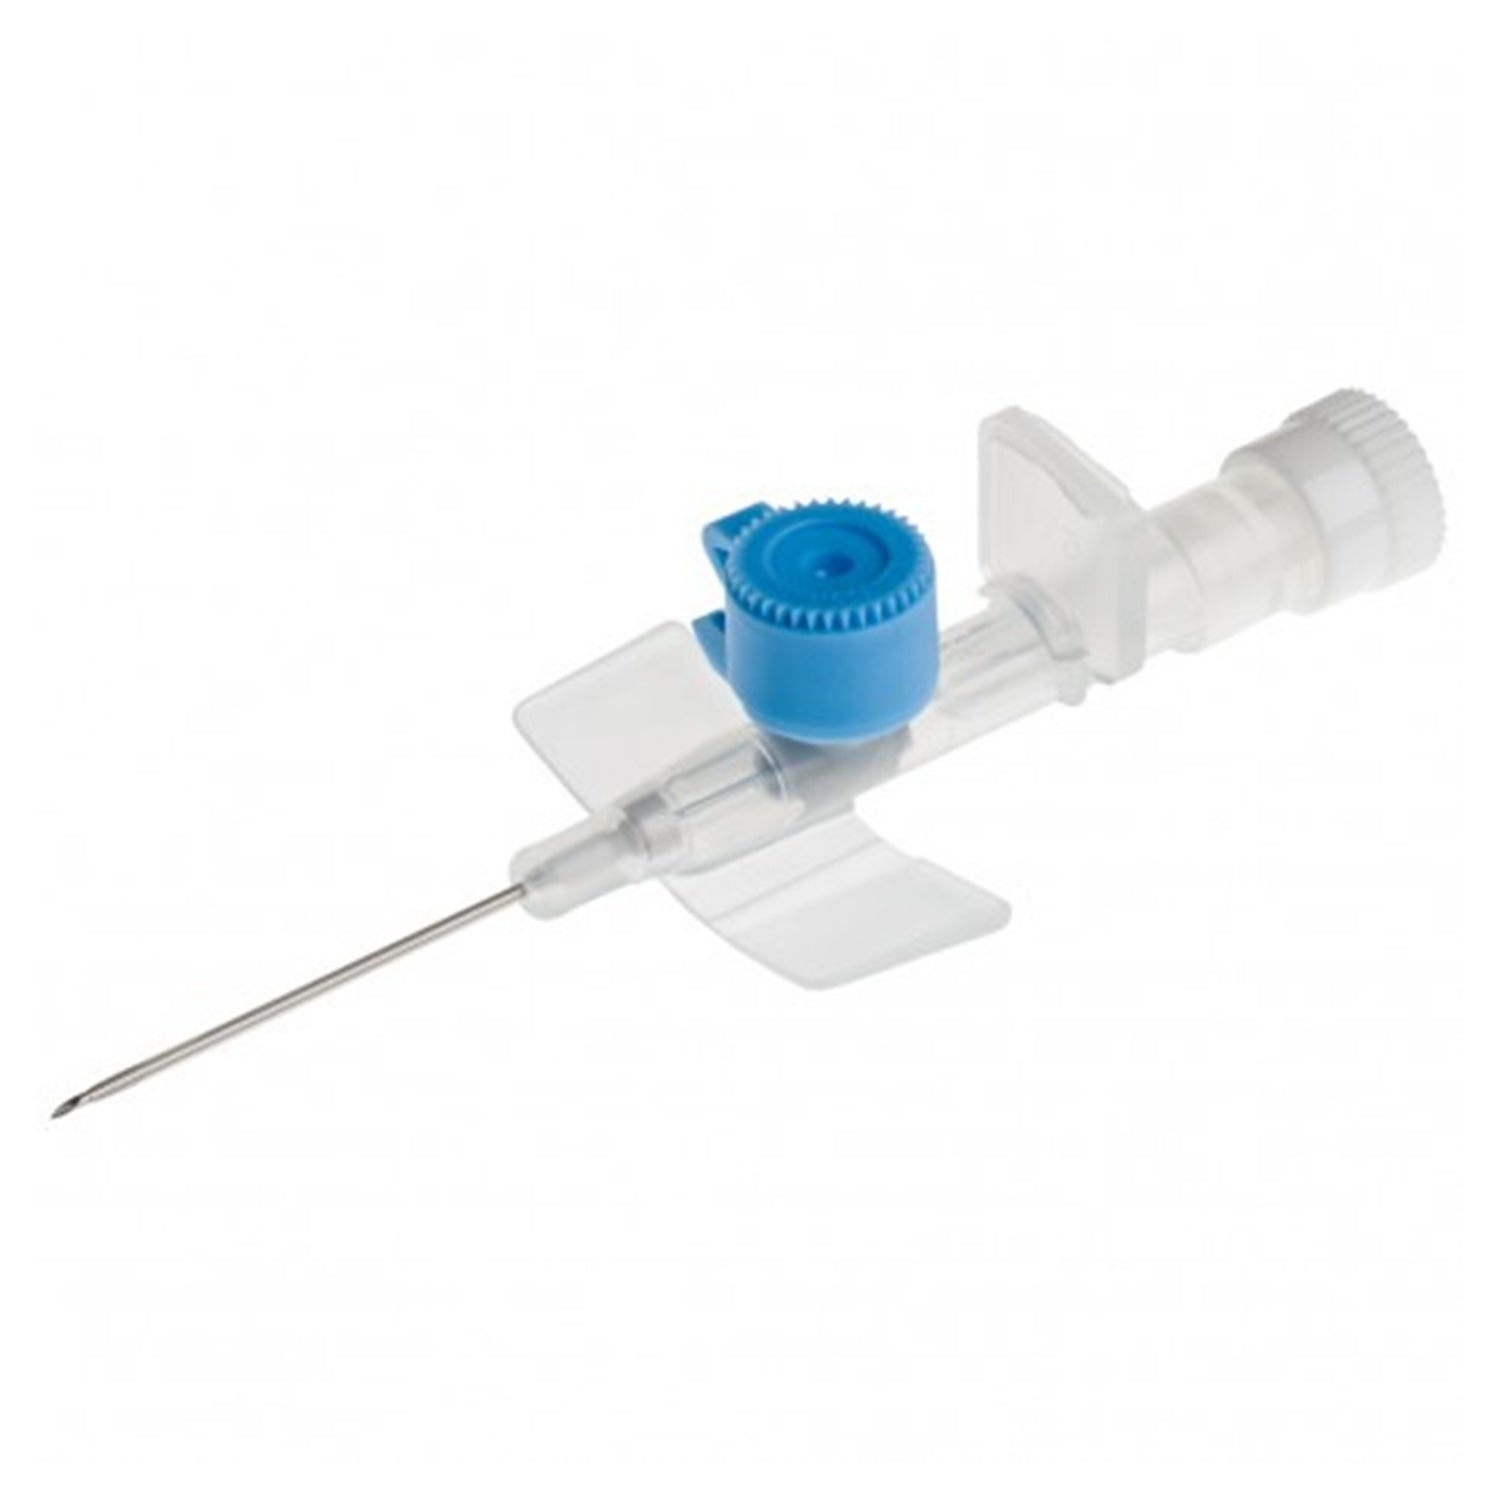 BD Venflon Pro Peripheral IV Cannula with Injection Port | Blue x 22G x 25 x 0.8mm | Pack of 50